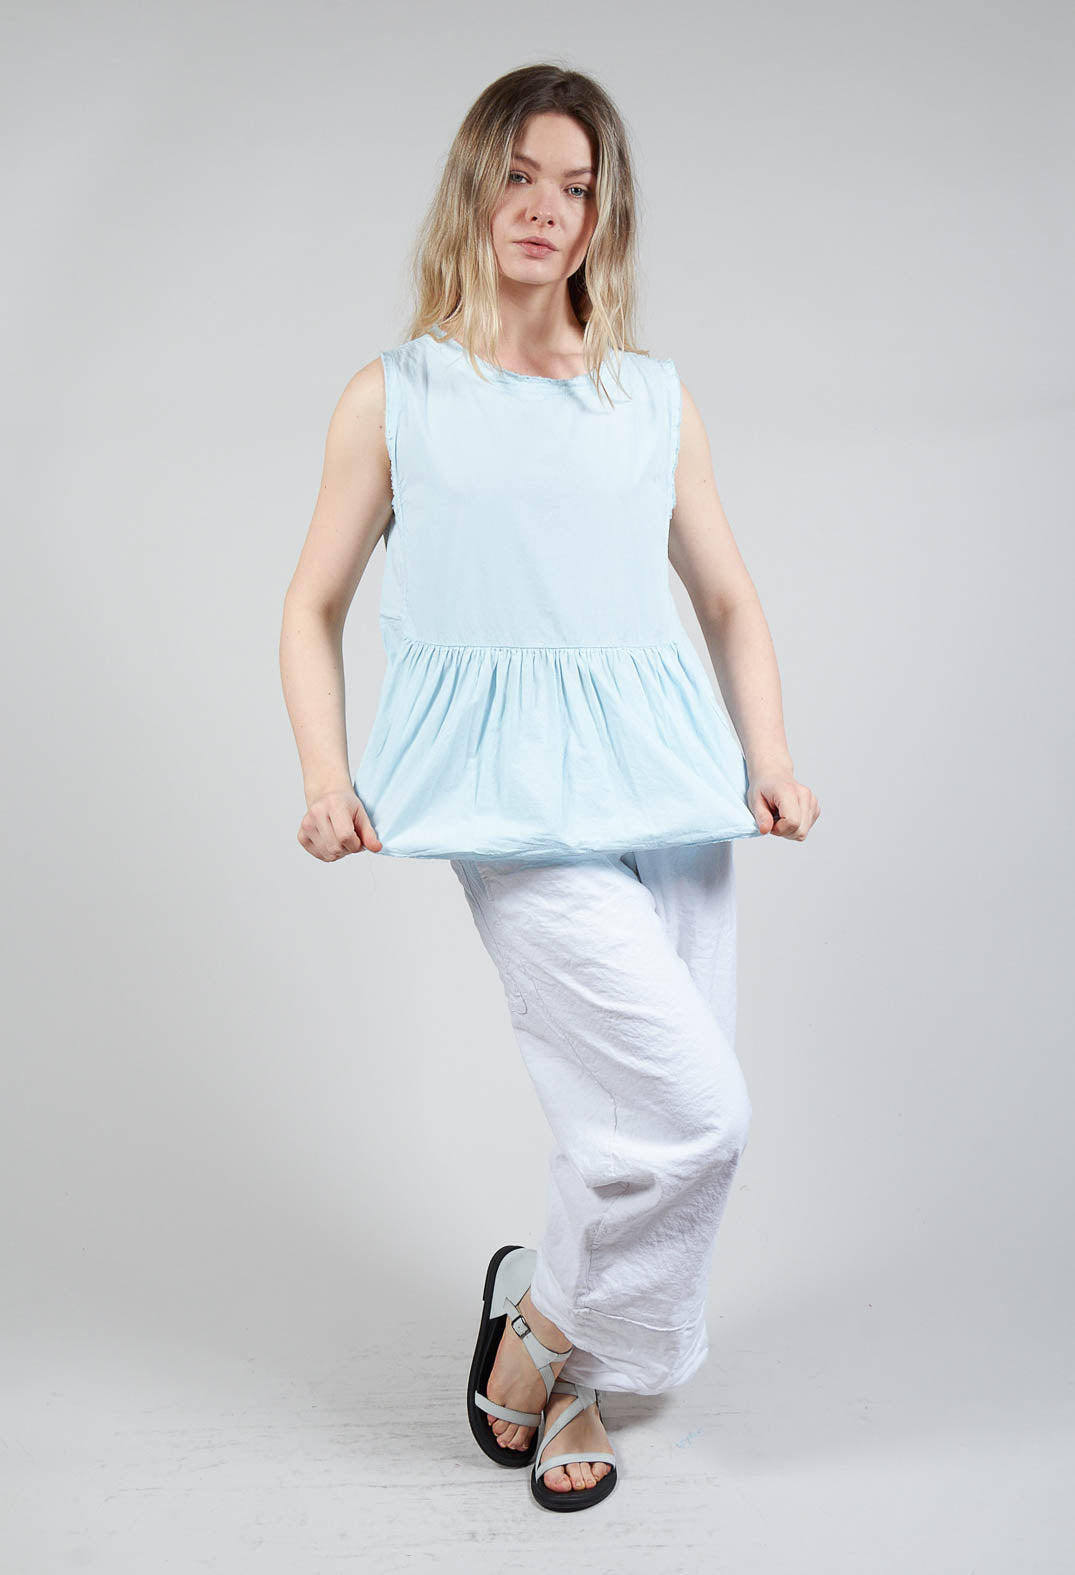 Tunic Blouse in Cielo